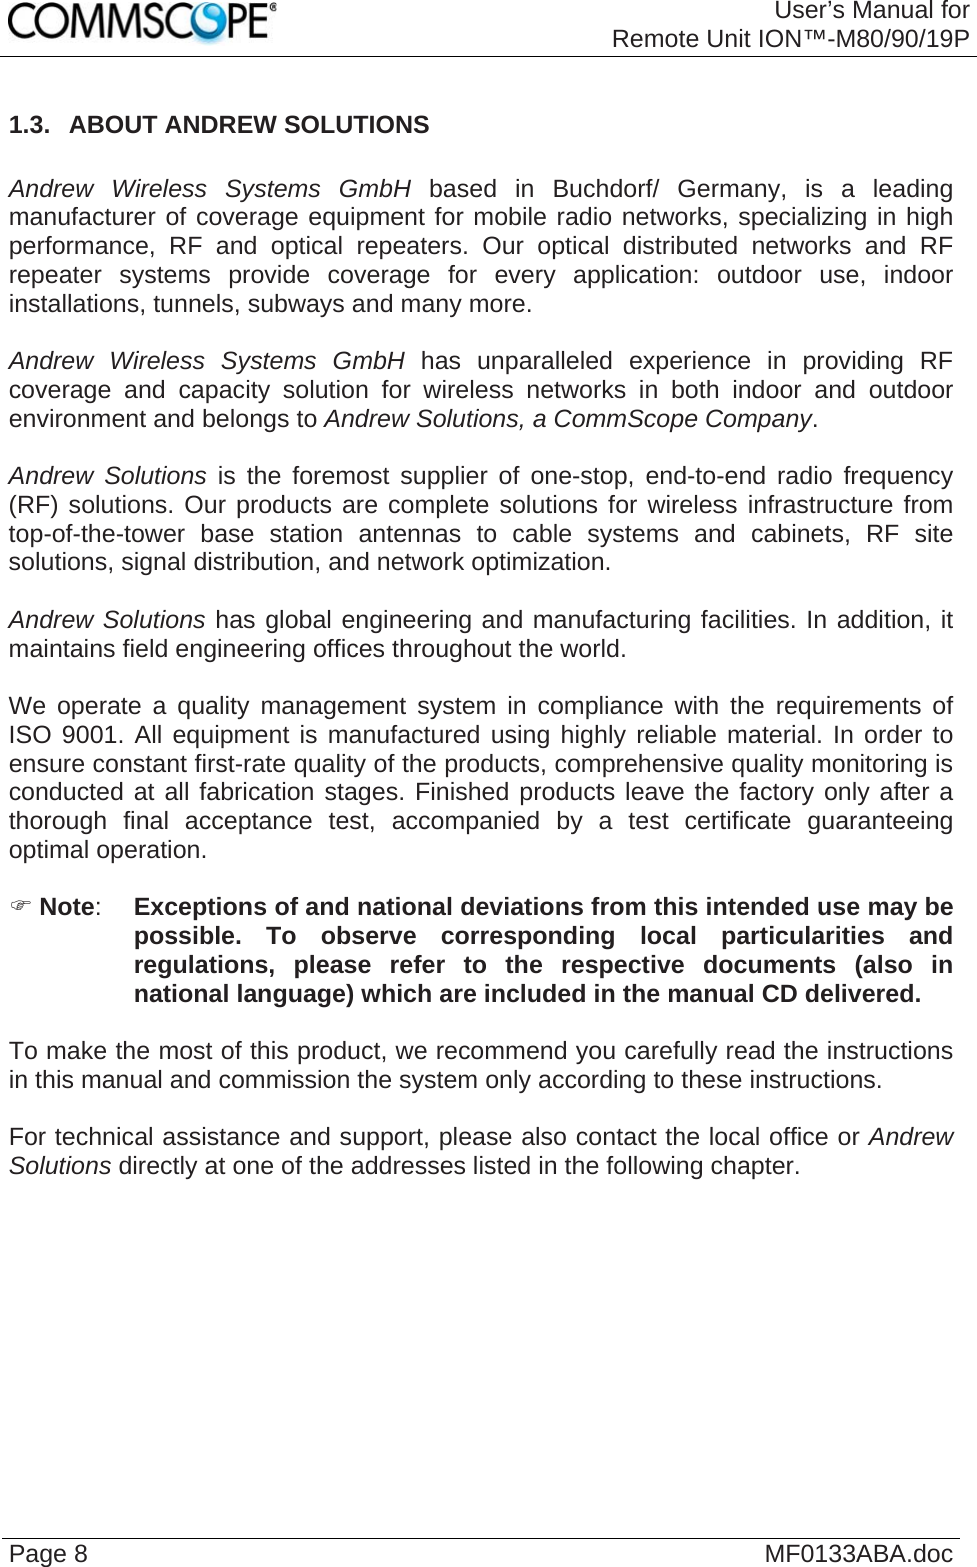 User’s Manual forRemote Unit ION™-M80/90/19P Page 8  MF0133ABA.doc 1.3.  ABOUT ANDREW SOLUTIONS  Andrew Wireless Systems GmbH based in Buchdorf/ Germany, is a leading manufacturer of coverage equipment for mobile radio networks, specializing in high performance, RF and optical repeaters. Our optical distributed networks and RF repeater systems provide coverage for every application: outdoor use, indoor installations, tunnels, subways and many more.  Andrew Wireless Systems GmbH has unparalleled experience in providing RF coverage and capacity solution for wireless networks in both indoor and outdoor environment and belongs to Andrew Solutions, a CommScope Company.  Andrew Solutions is the foremost supplier of one-stop, end-to-end radio frequency (RF) solutions. Our products are complete solutions for wireless infrastructure from top-of-the-tower base station antennas to cable systems and cabinets, RF site solutions, signal distribution, and network optimization.  Andrew Solutions has global engineering and manufacturing facilities. In addition, it maintains field engineering offices throughout the world.  We operate a quality management system in compliance with the requirements of ISO 9001. All equipment is manufactured using highly reliable material. In order to ensure constant first-rate quality of the products, comprehensive quality monitoring is conducted at all fabrication stages. Finished products leave the factory only after a thorough final acceptance test, accompanied by a test certificate guaranteeing optimal operation.  ) Note:  Exceptions of and national deviations from this intended use may be possible. To observe corresponding local particularities and regulations, please refer to the respective documents (also in national language) which are included in the manual CD delivered.  To make the most of this product, we recommend you carefully read the instructions in this manual and commission the system only according to these instructions.   For technical assistance and support, please also contact the local office or Andrew Solutions directly at one of the addresses listed in the following chapter.  